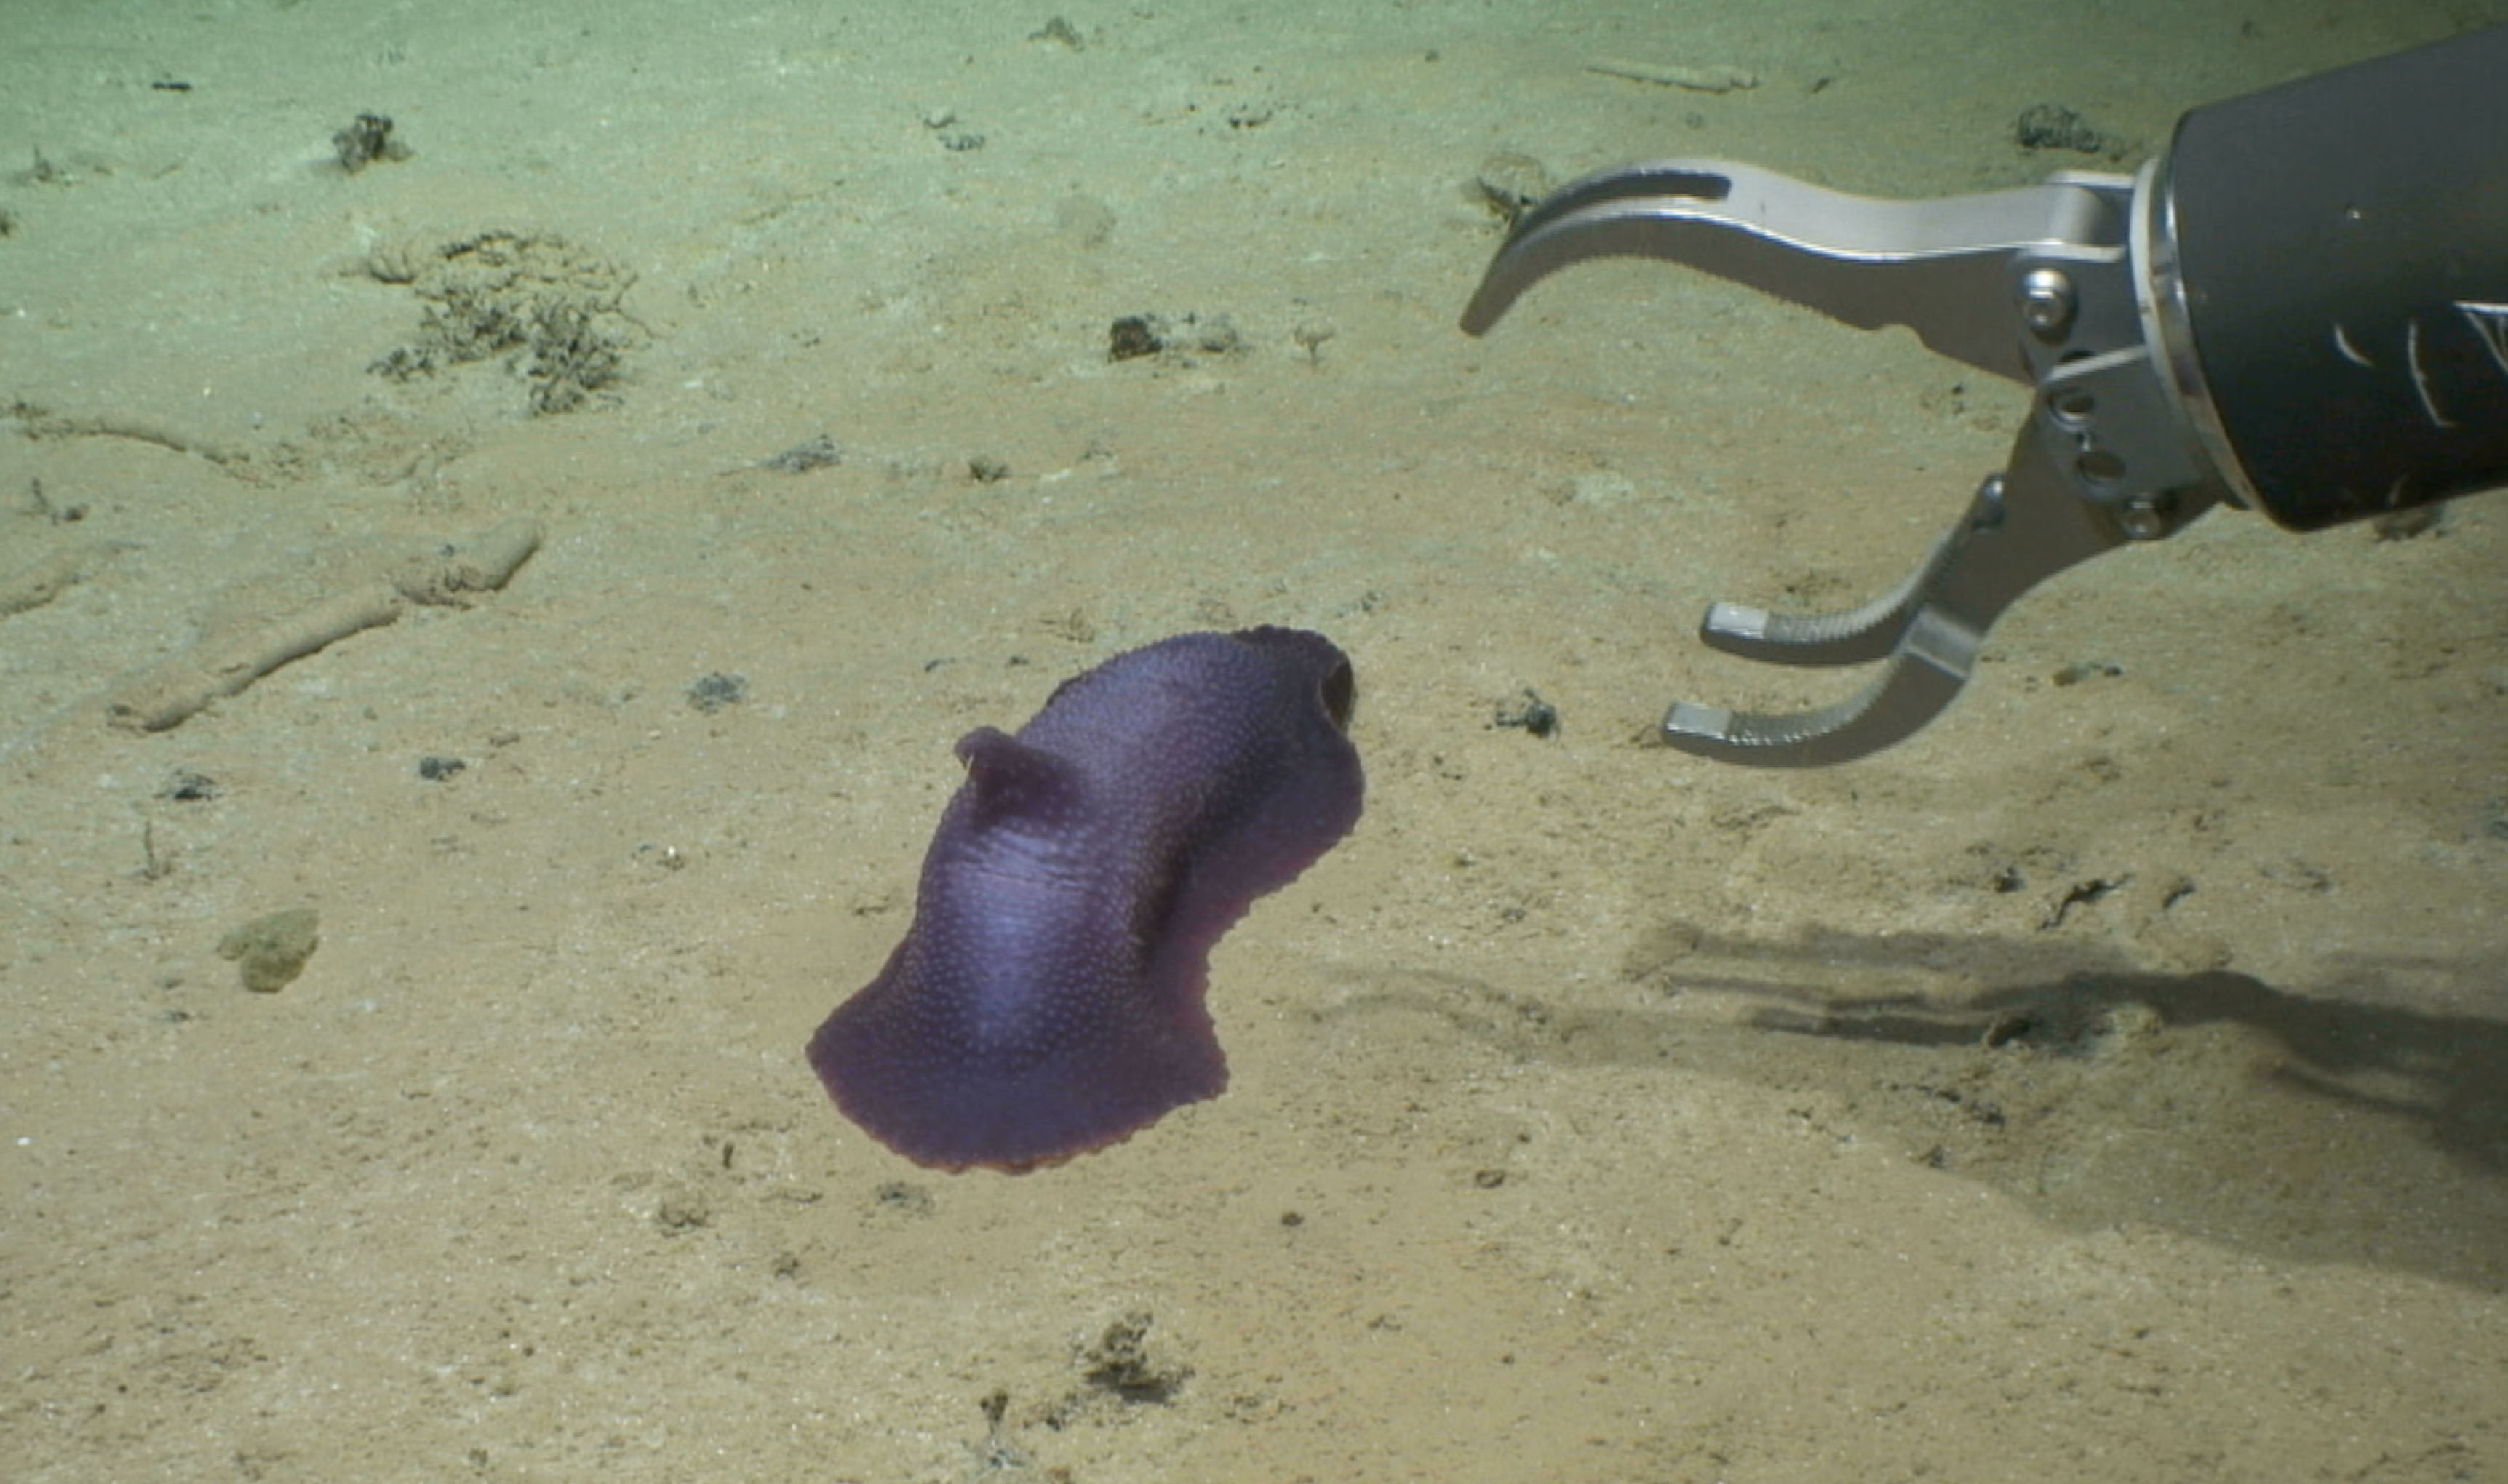 Robots discover 39 new species at the bottom of the ocean